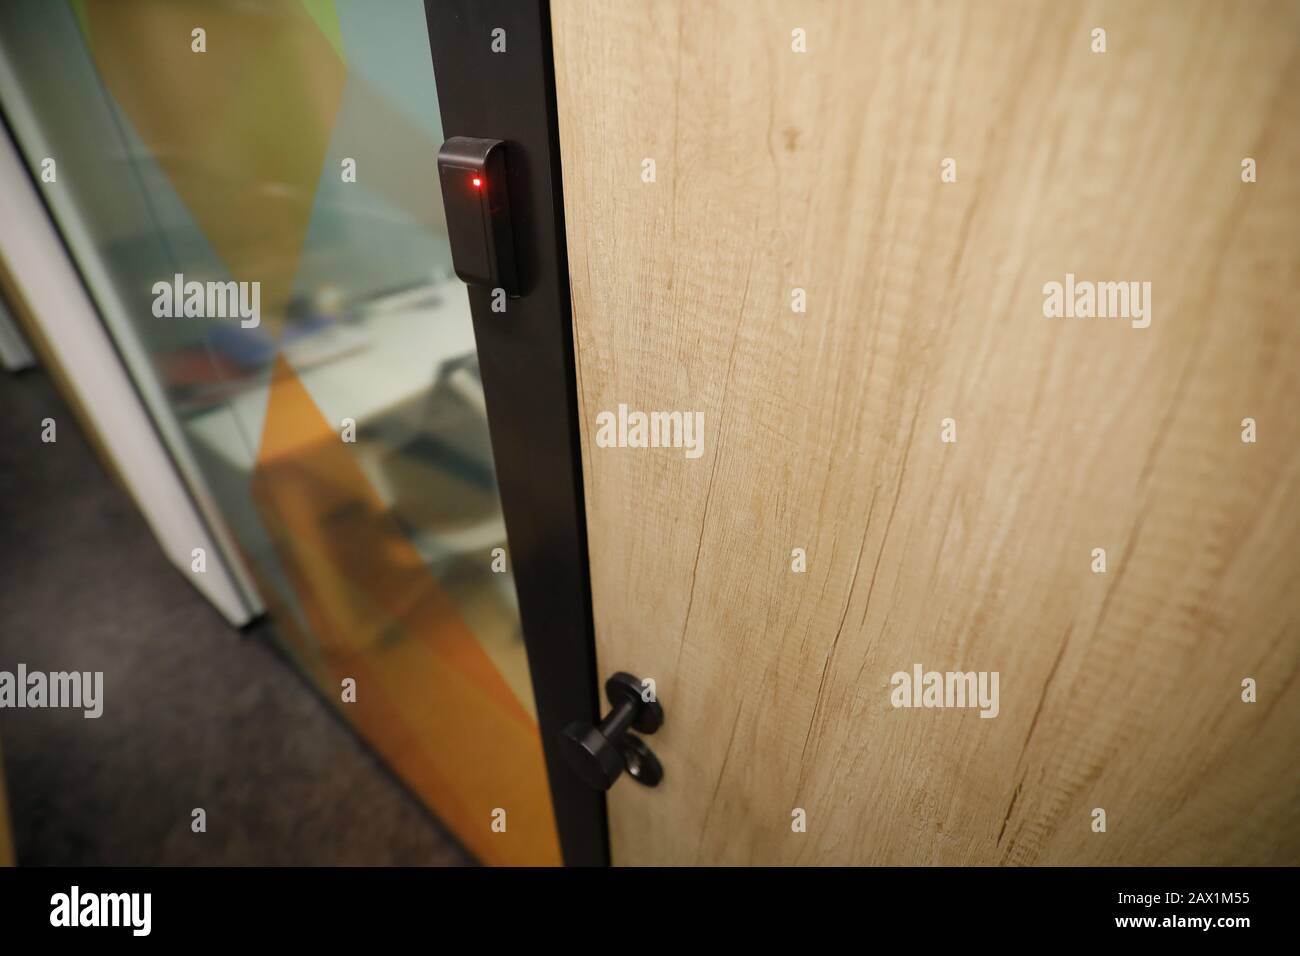 Shallow depth of field (selective focus) image with the locked wooden door inside an office building. Stock Photo